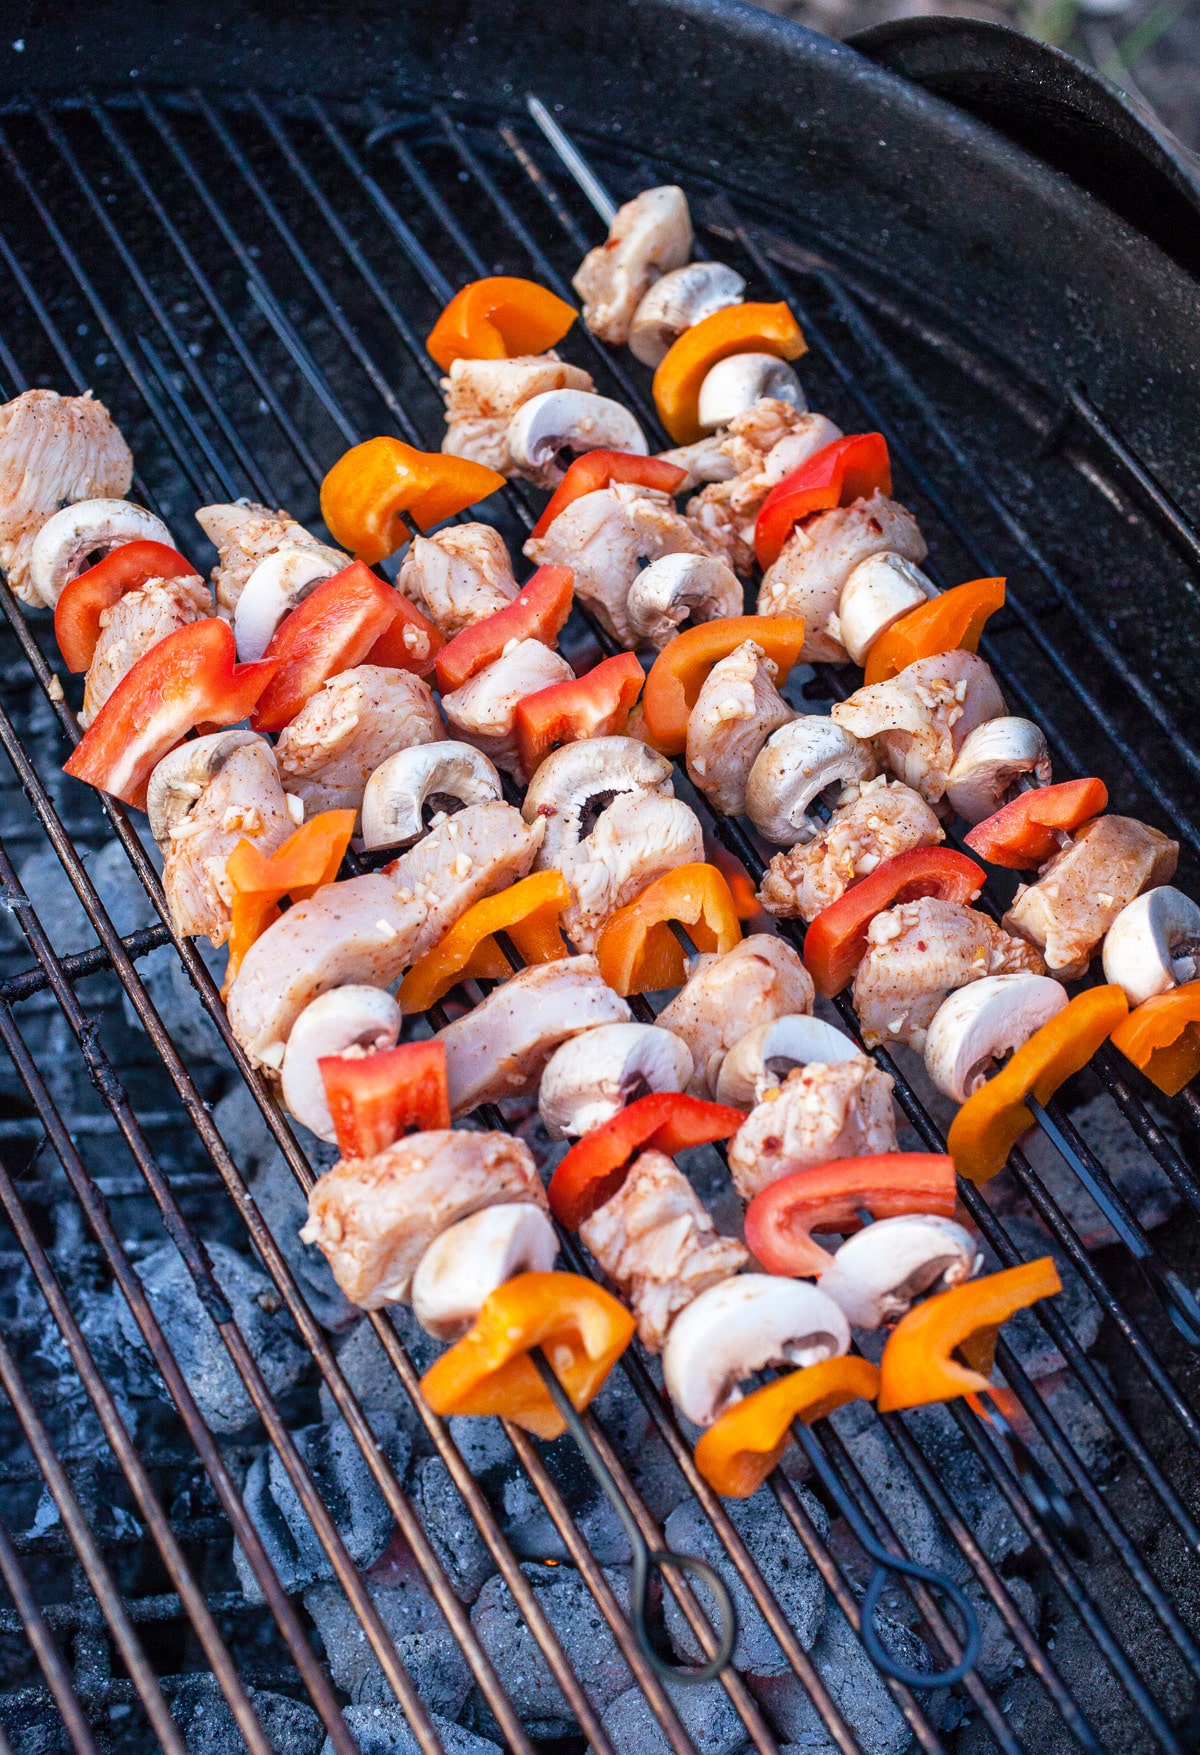 Chicken and vegetable skewers on Weber charcoal grill.